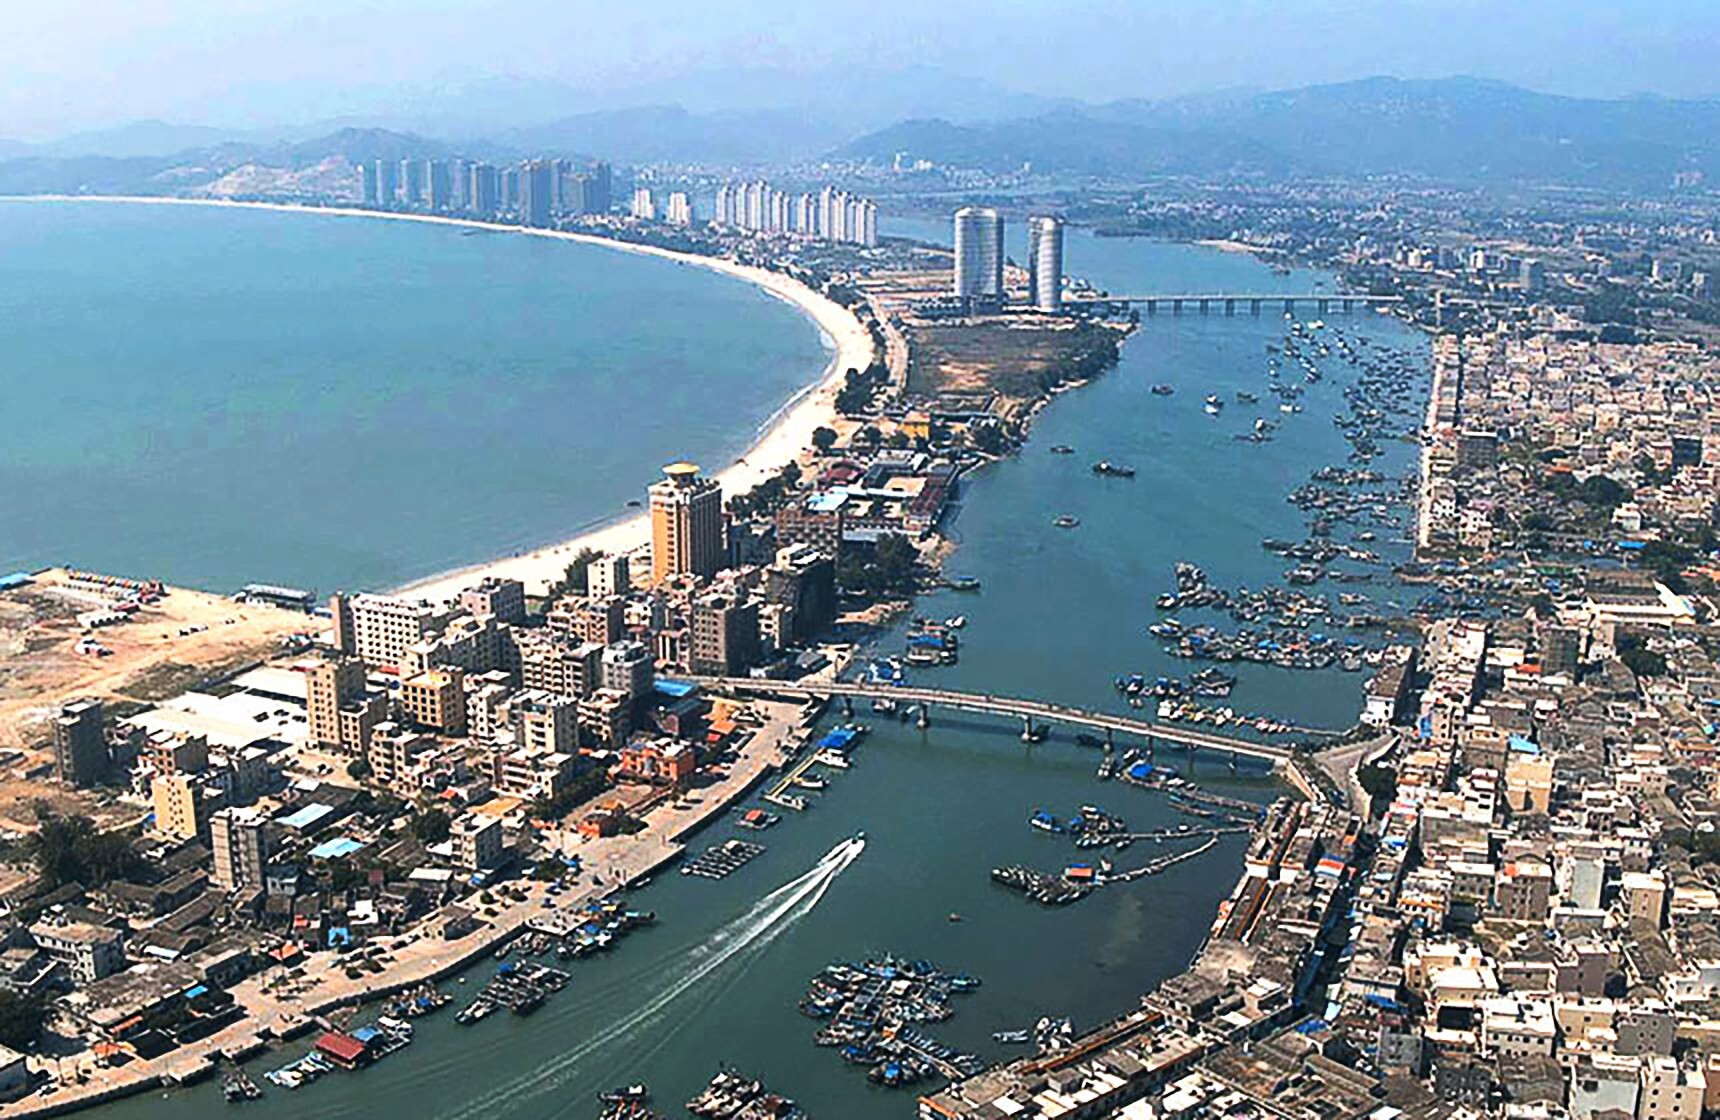 Huizhou is among nine mainland Chinese cities that together with Hong Kong and Macau form the Greater Bay Area. Photo: Handout